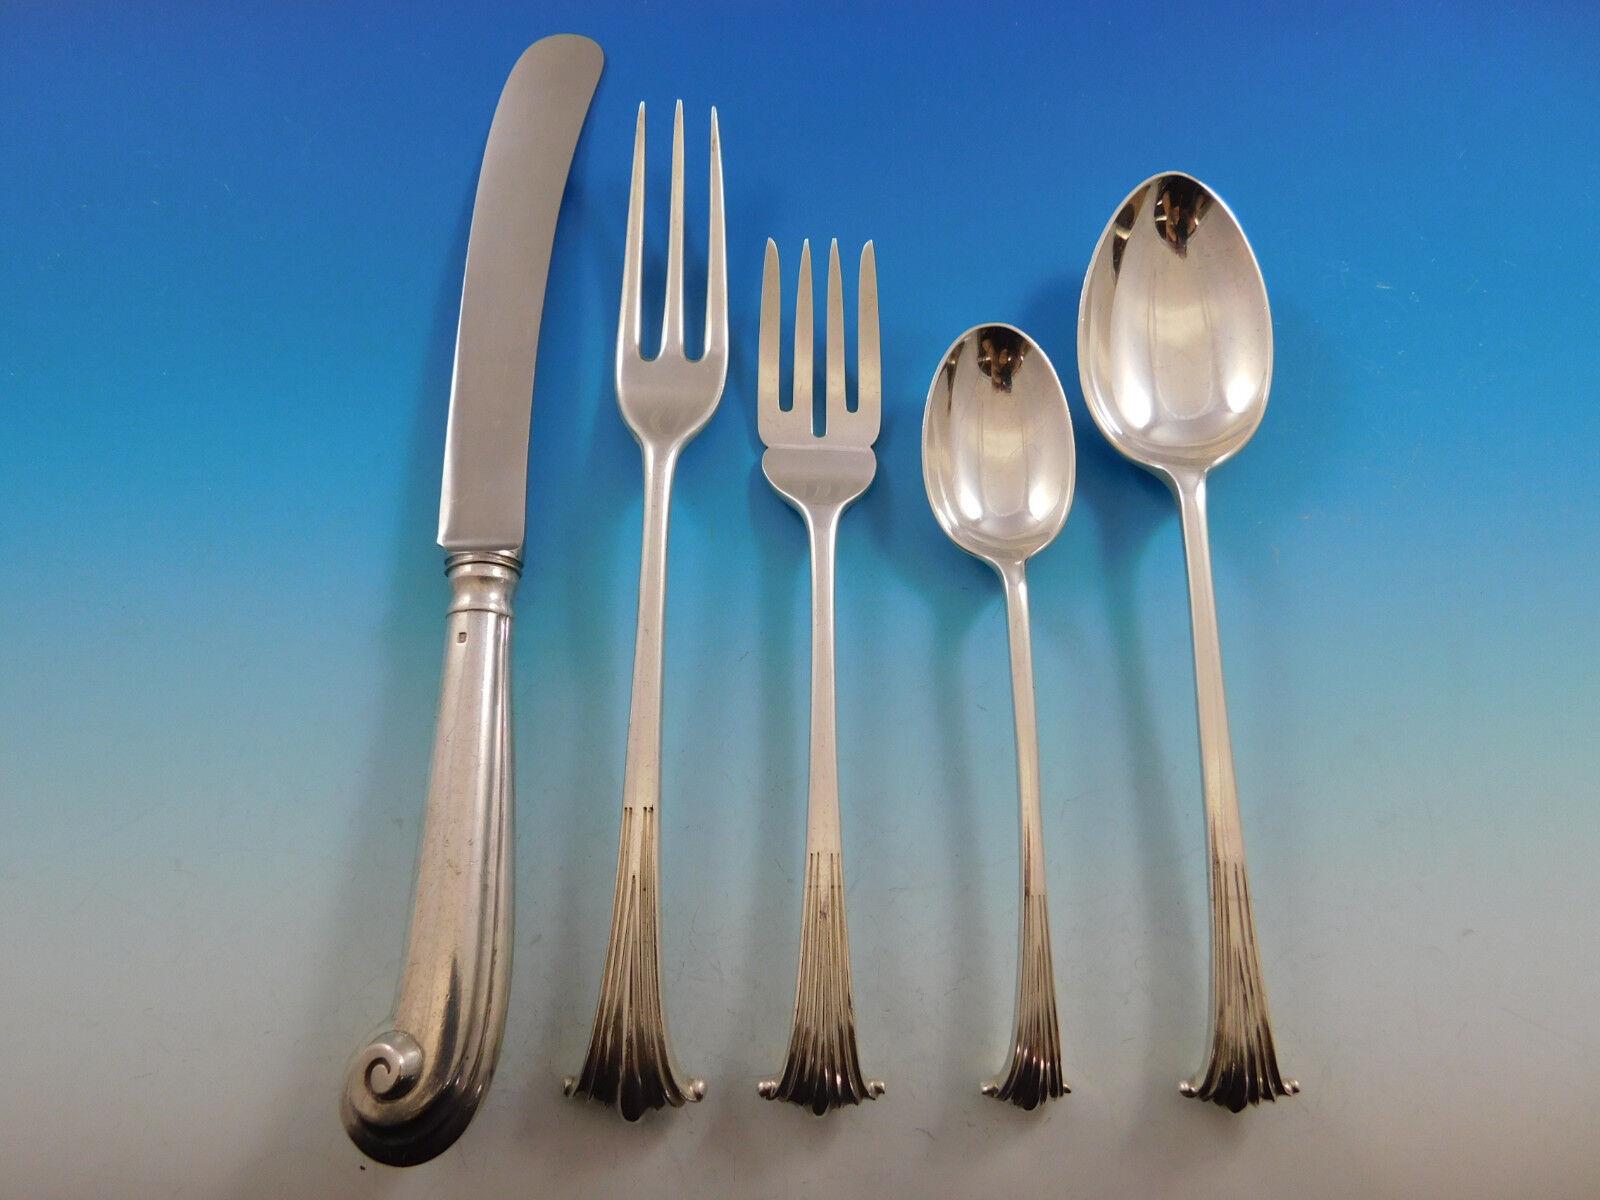 Superb Onslow by Marshall Fields (retailer) English sterling silver Flatware set, 55 pieces. This set includes:

10 Dinner Size Knives, pistol grip, 9 5/8